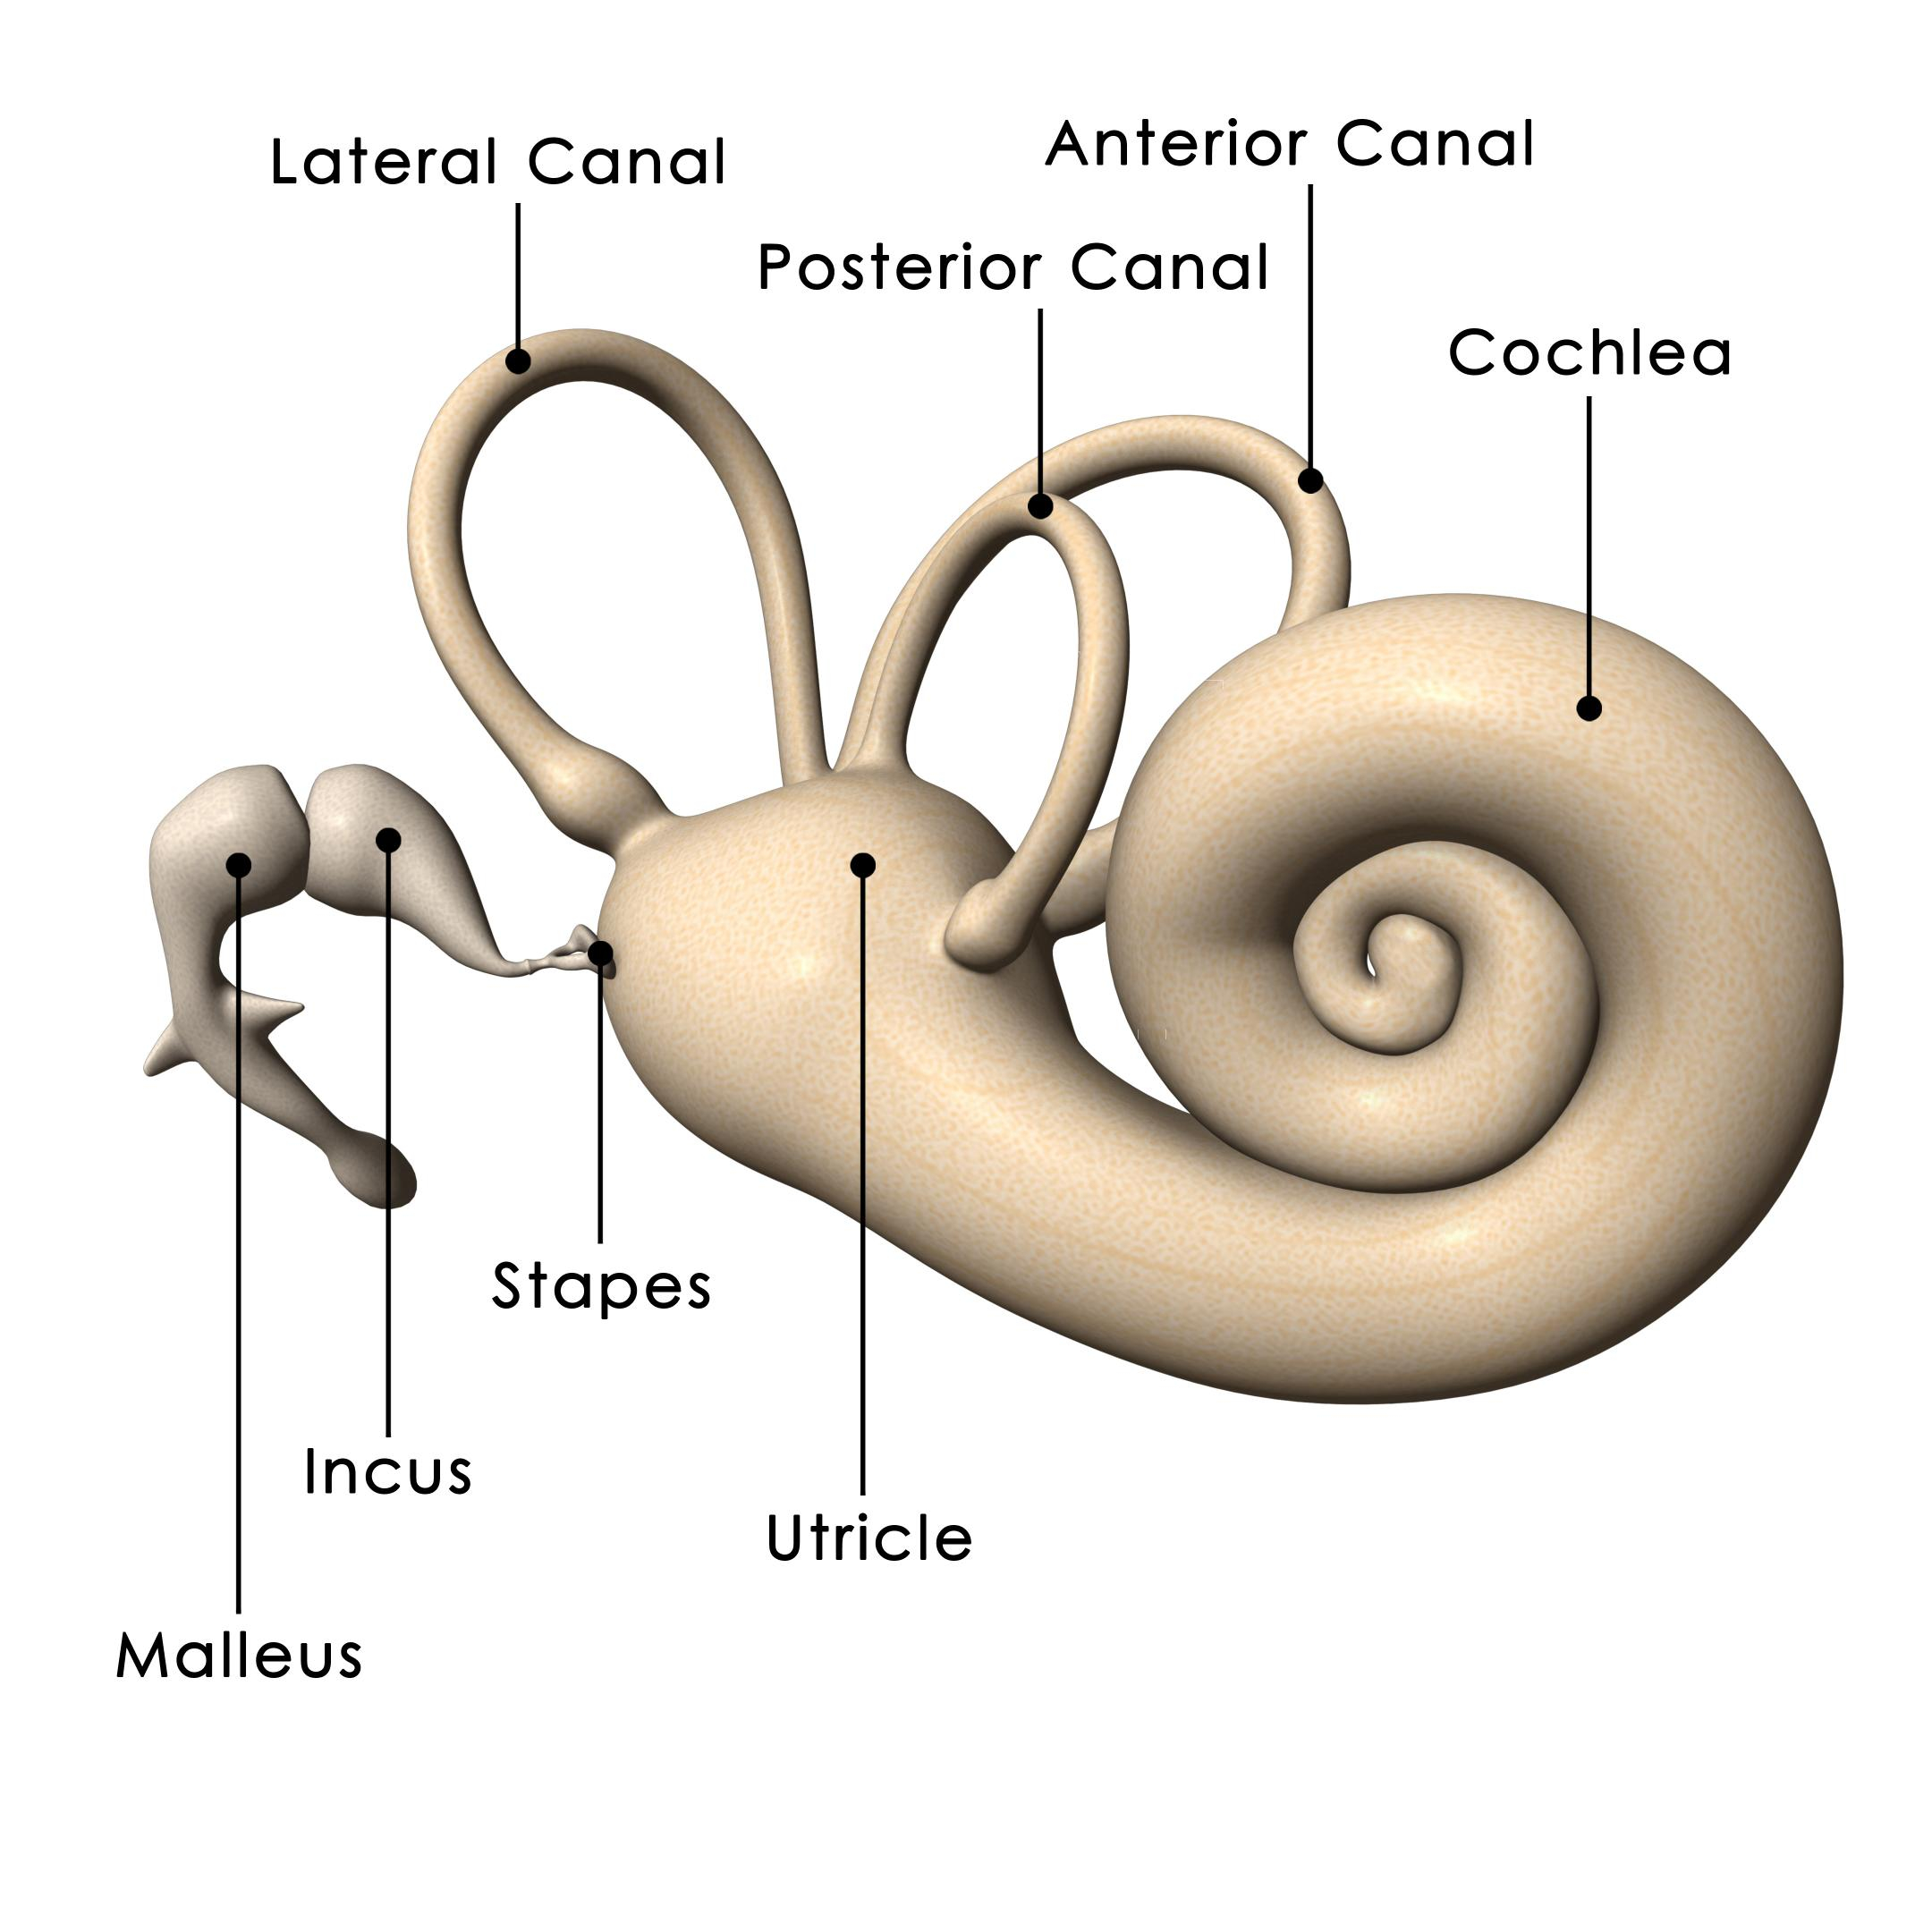 Inner Ear Diagram Ears And Hearing How Do They Work